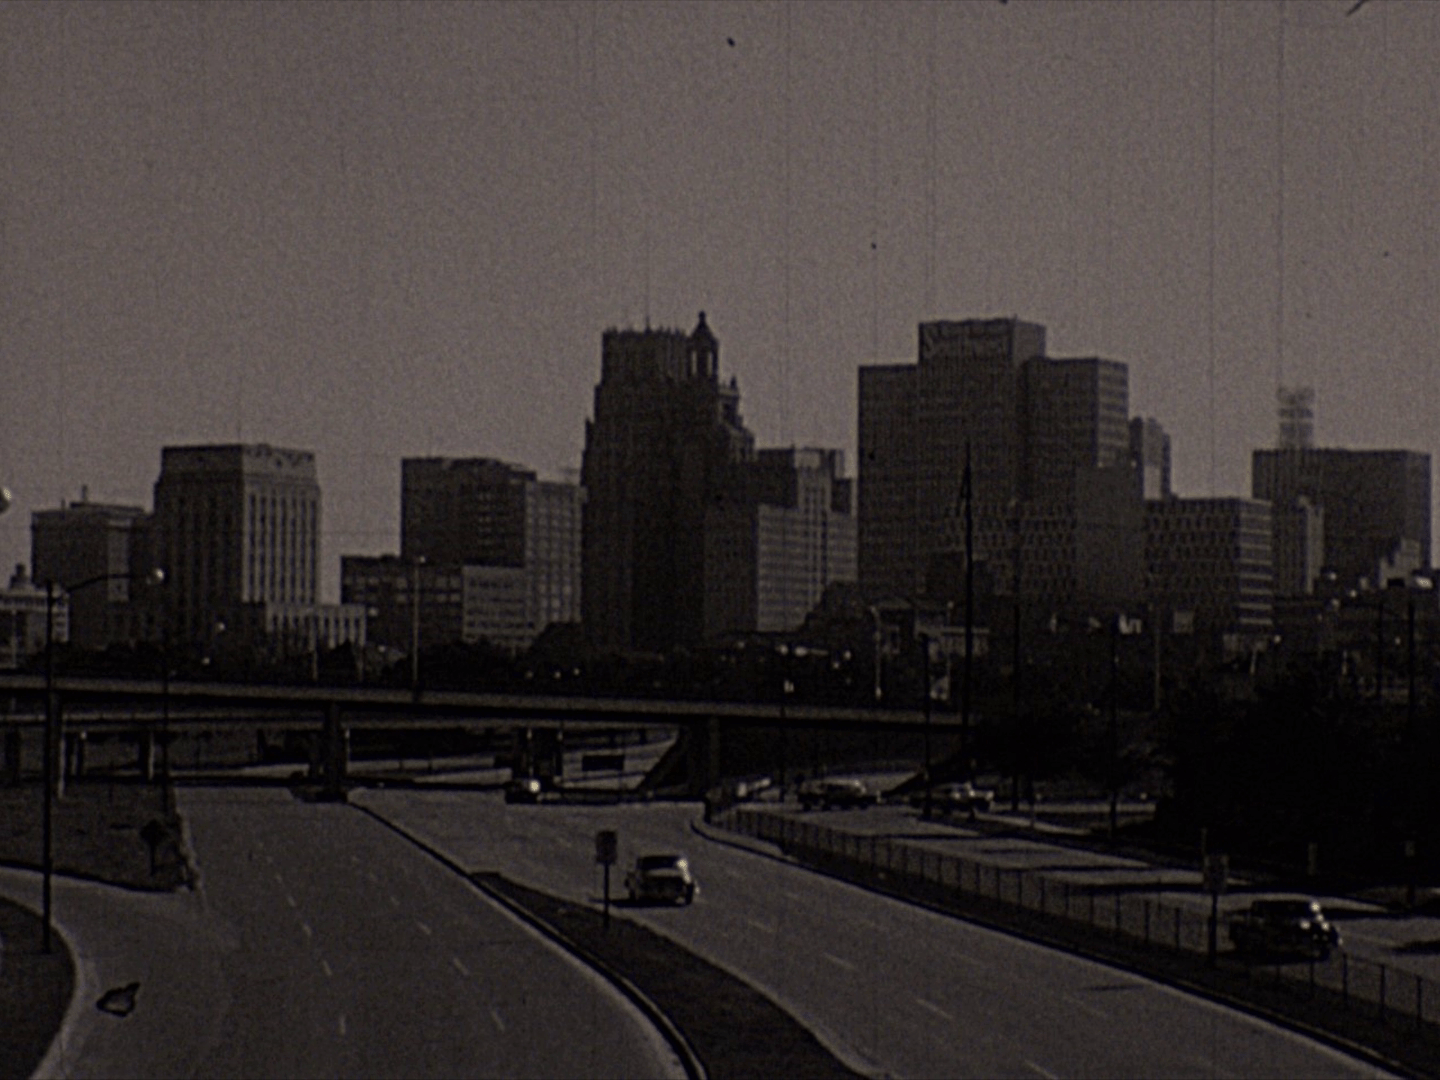 Downtown Houston (HD). [Screenshot from "Help Wanted" (1958), AVF.MS238.001, MS 238 Films on Mental Health provided by Bill Schnapp, McGovern Historical Center, Texas Medical Center Library]